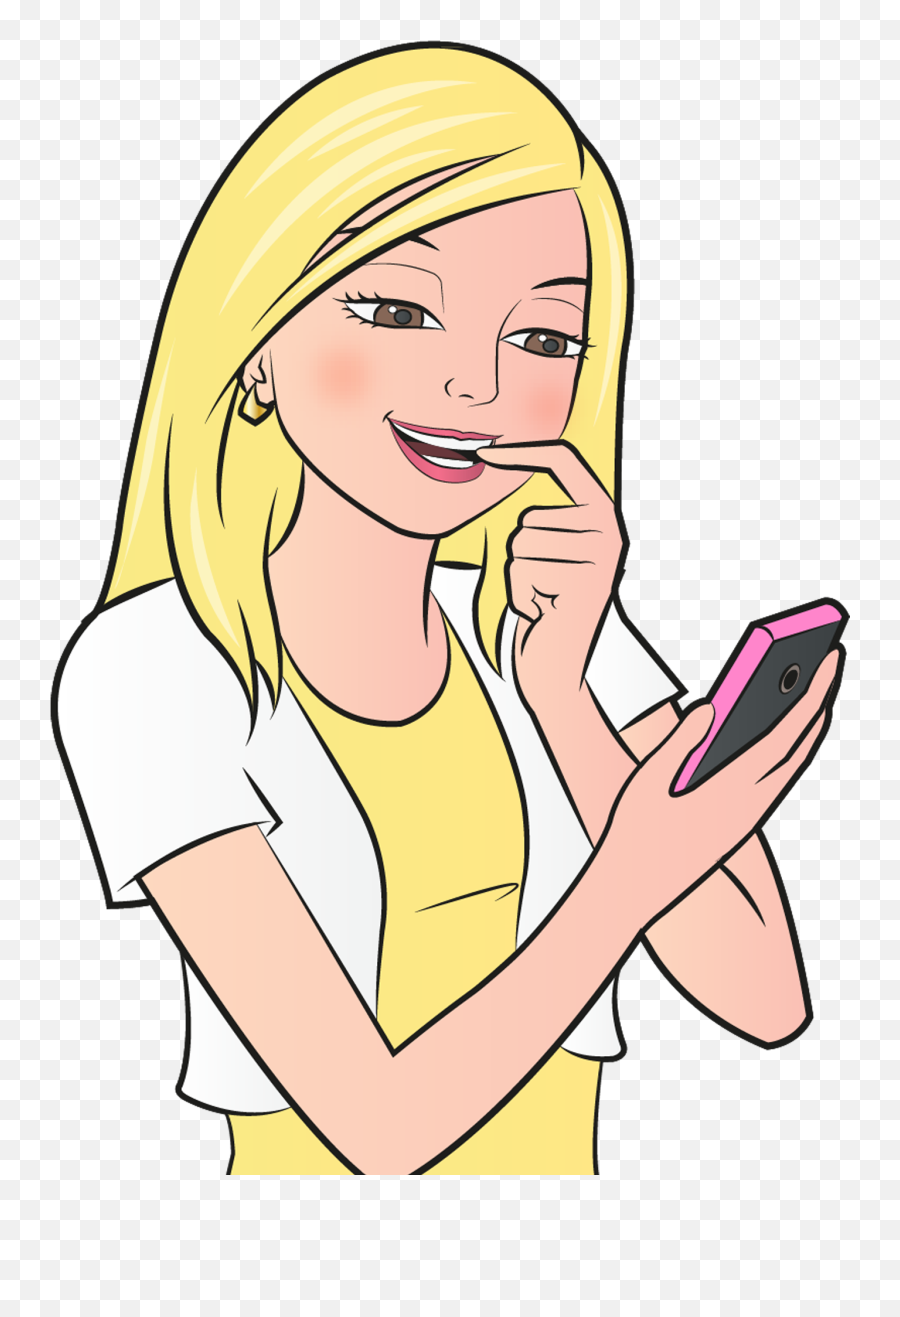 Flirty Text Messages To Send To A Guy - Send Text Messages Cartoon Emoji,Dancing Emoticons For Texting